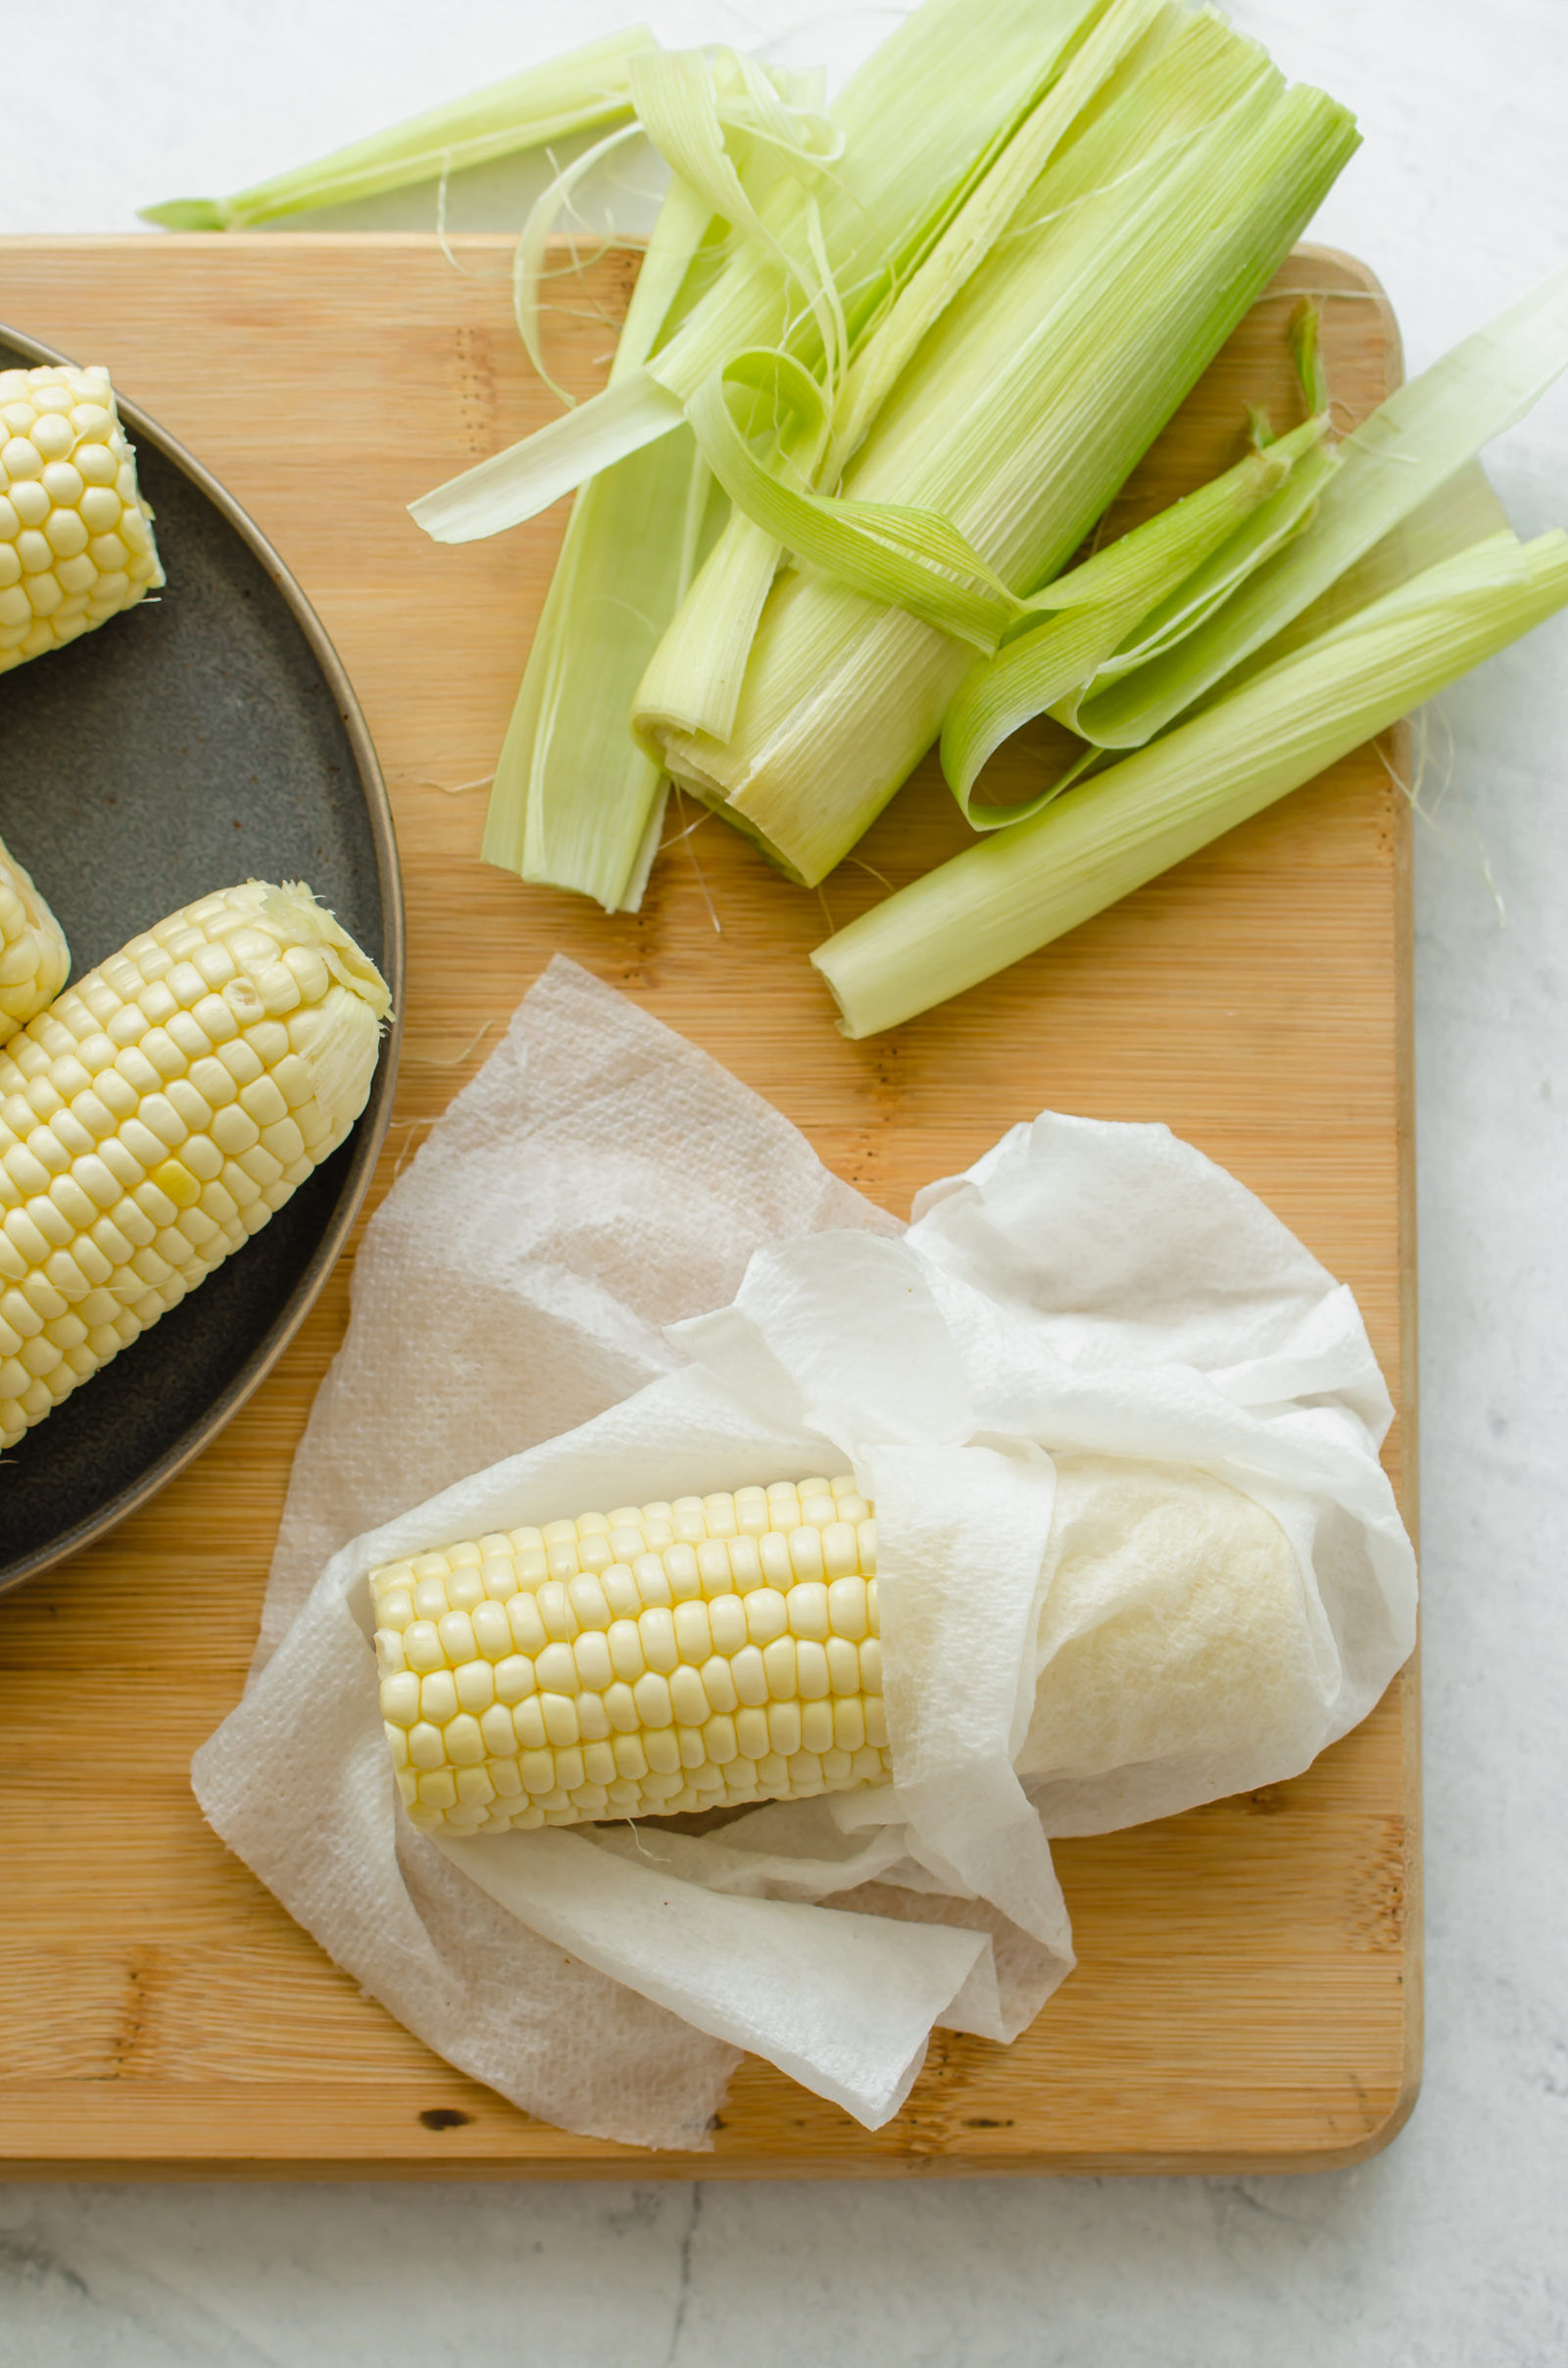 How to Microwave Corn on the Cob (NoBoil Method!)